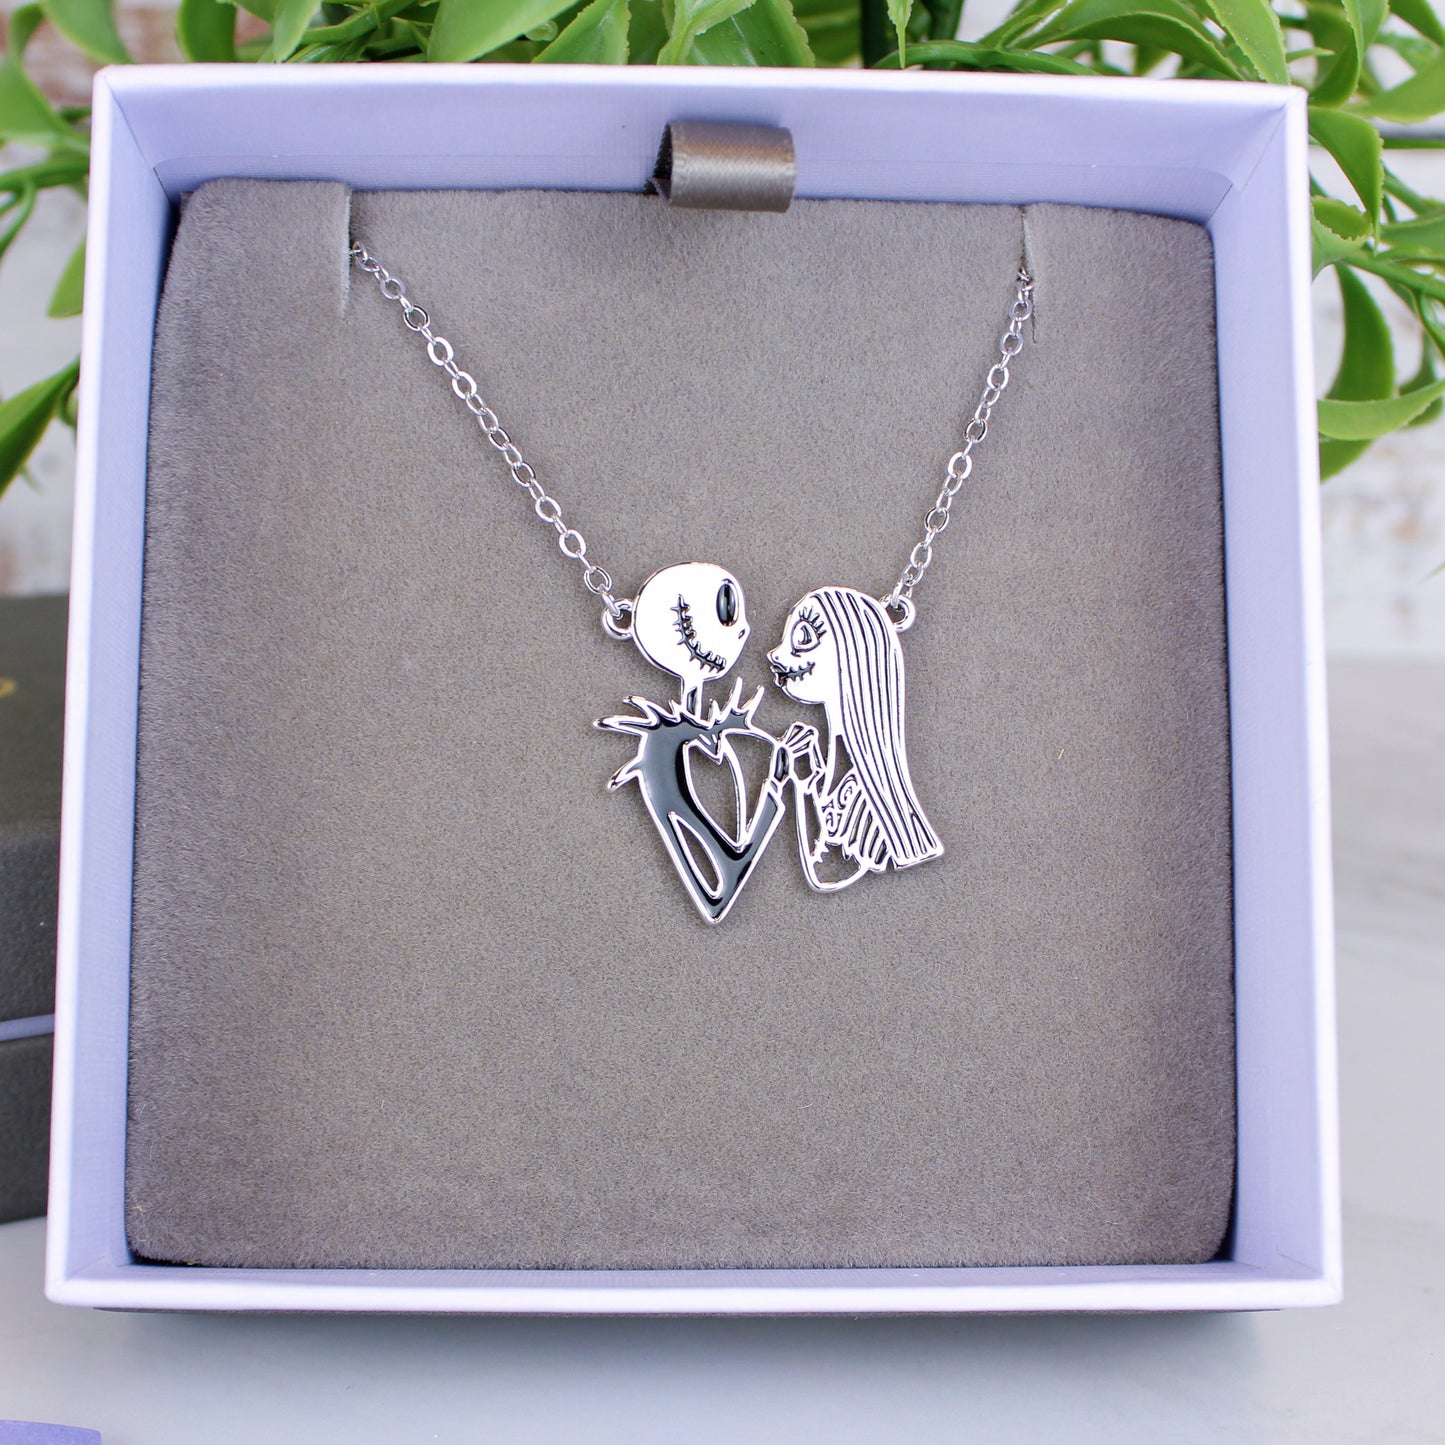 Jack & Sally The Nightmare Before Christmas White Gold Plated Disney Couture Necklace